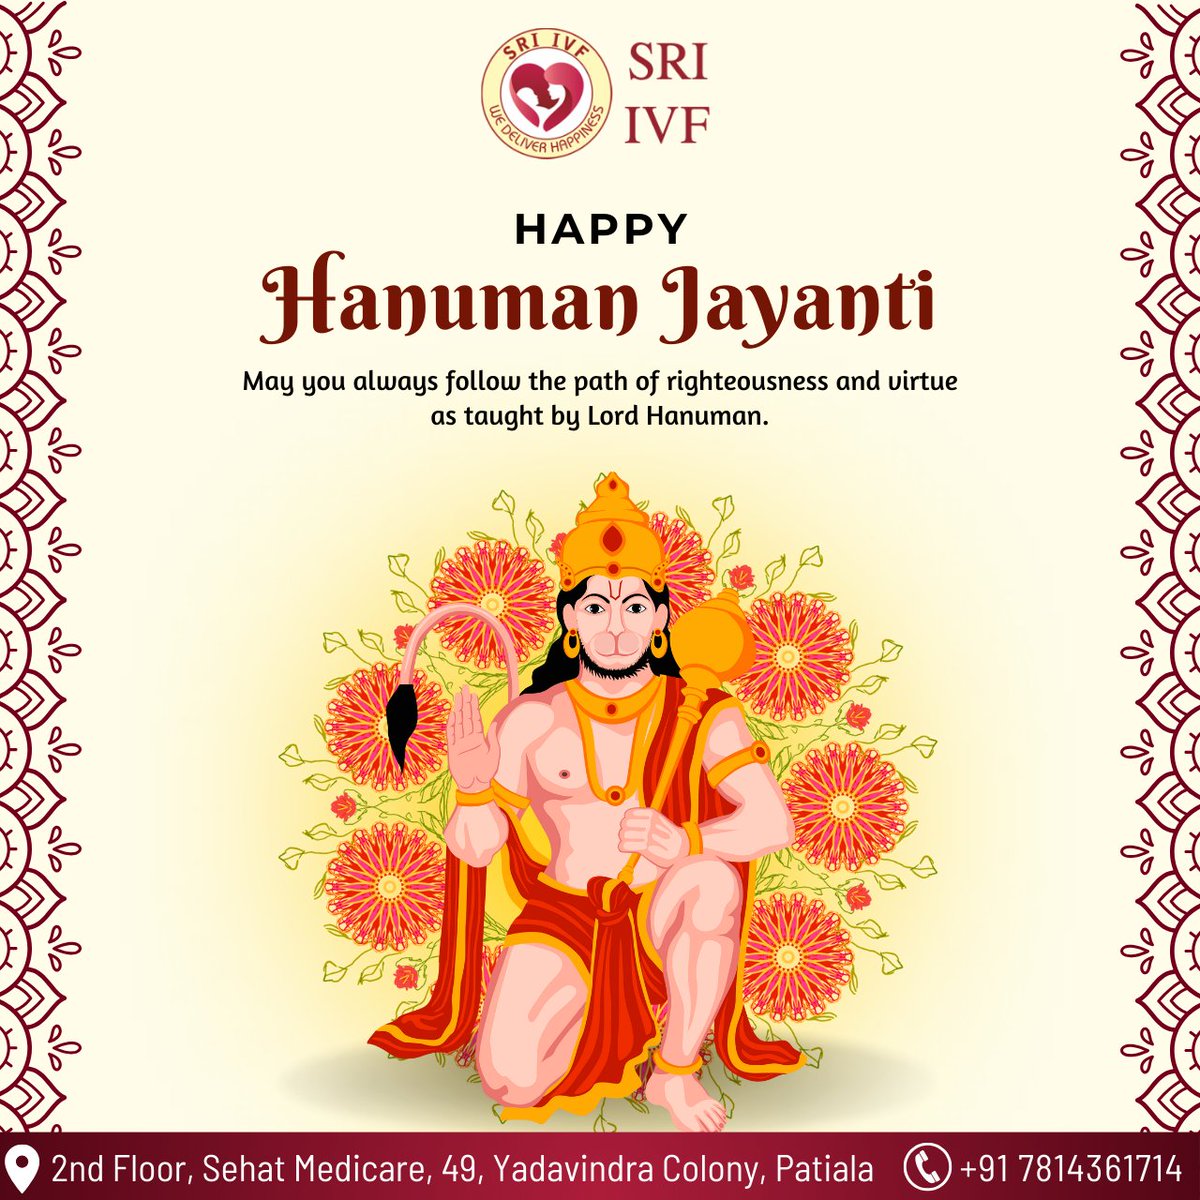 On this auspicious day, may Lord Hanuman bless you with courage and wisdom. Happy Hanuman Jayanti! . . . #HanumanJayanti #LordHanuman #JaiBajrangBali #HanumanJayanti2024 #BlessingsOfHanuman #HanumanJanmotsav #bestivfcenterinpatiala #sriivf #patiala #punjab #sriivfpataila